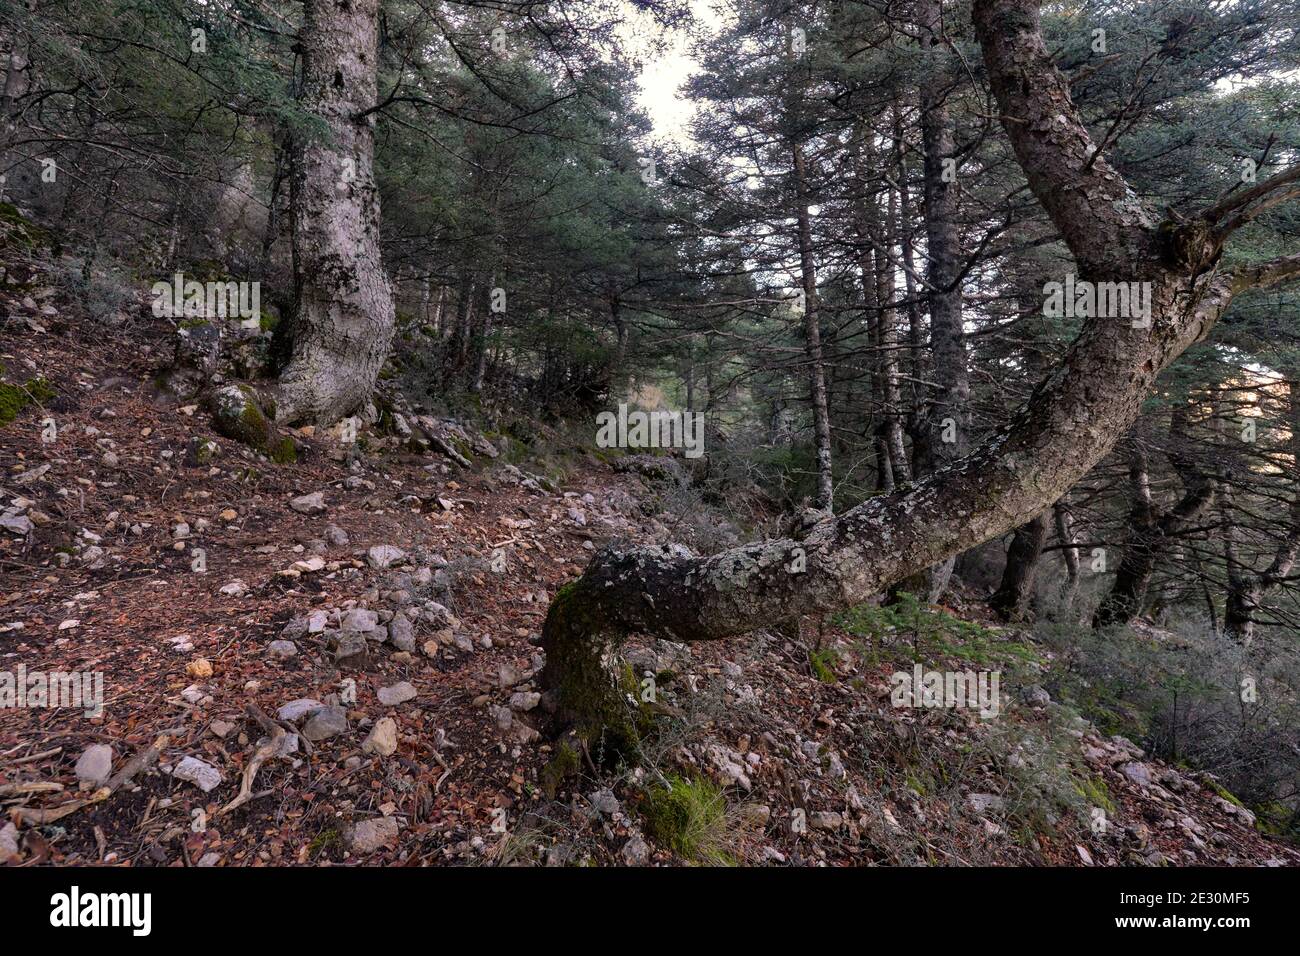 Forest of Pinsapos (Abies pinsapo) trail in the Sierra de las Nieves National Park in the province of Malaga. Andalusia, Spain Stock Photo